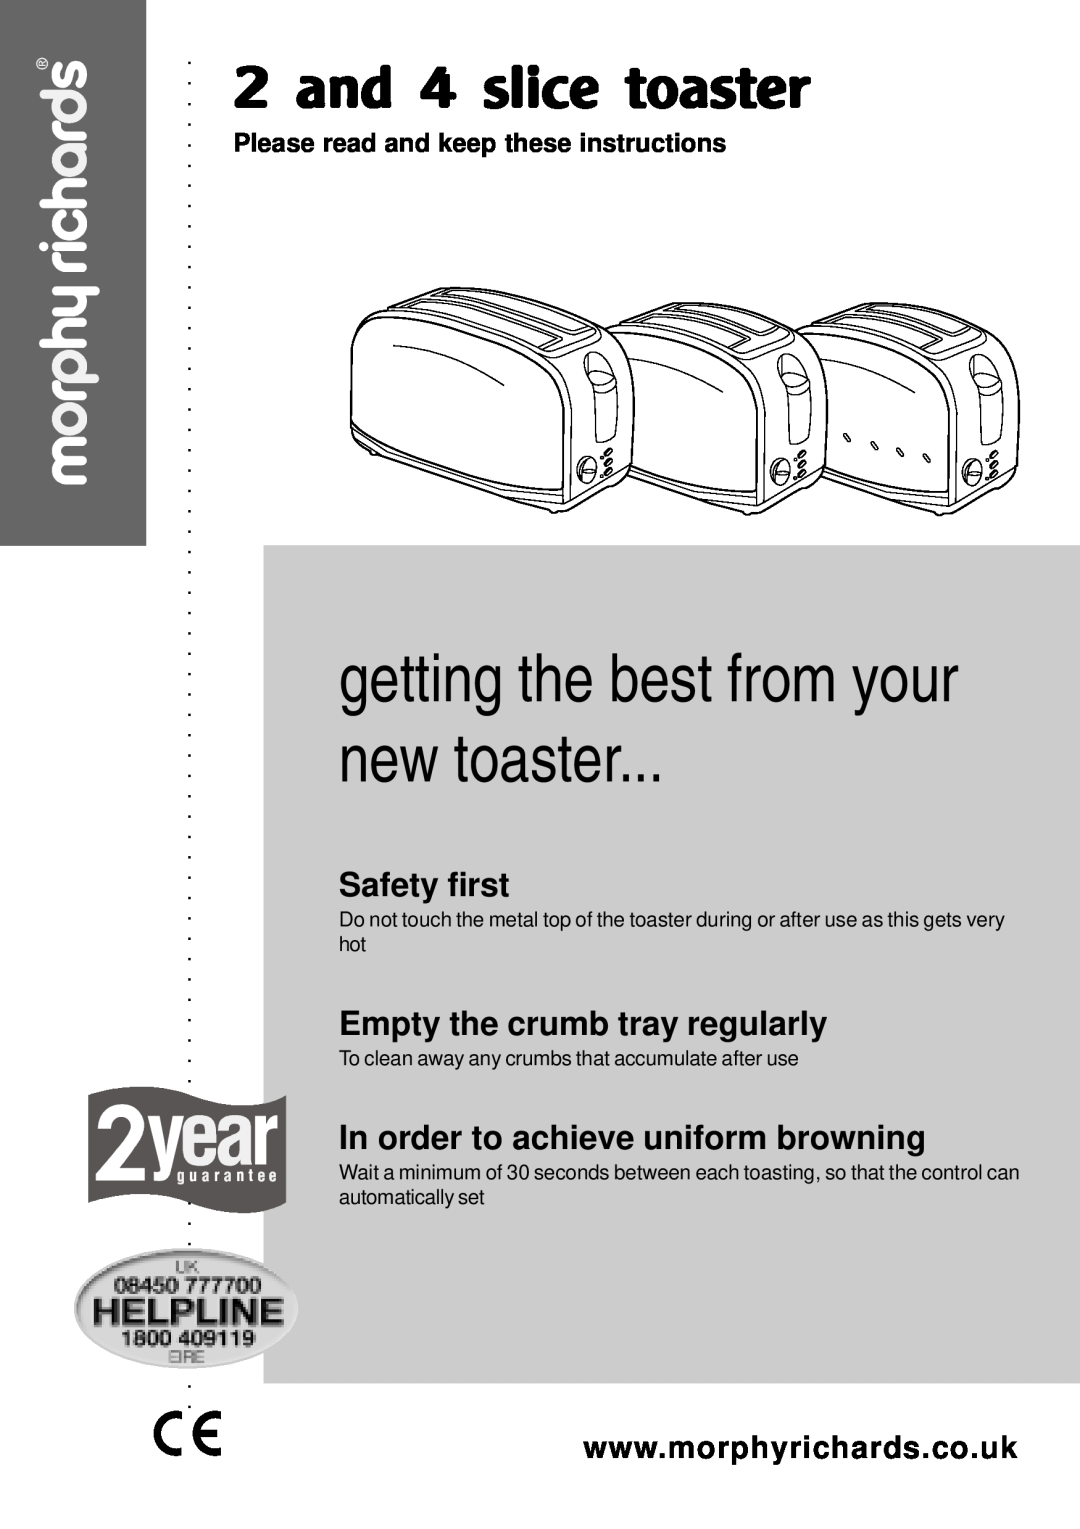 Morphy Richards Toaster manual new toaster, getting the best from your, and 4 slice toaster, Safety first 